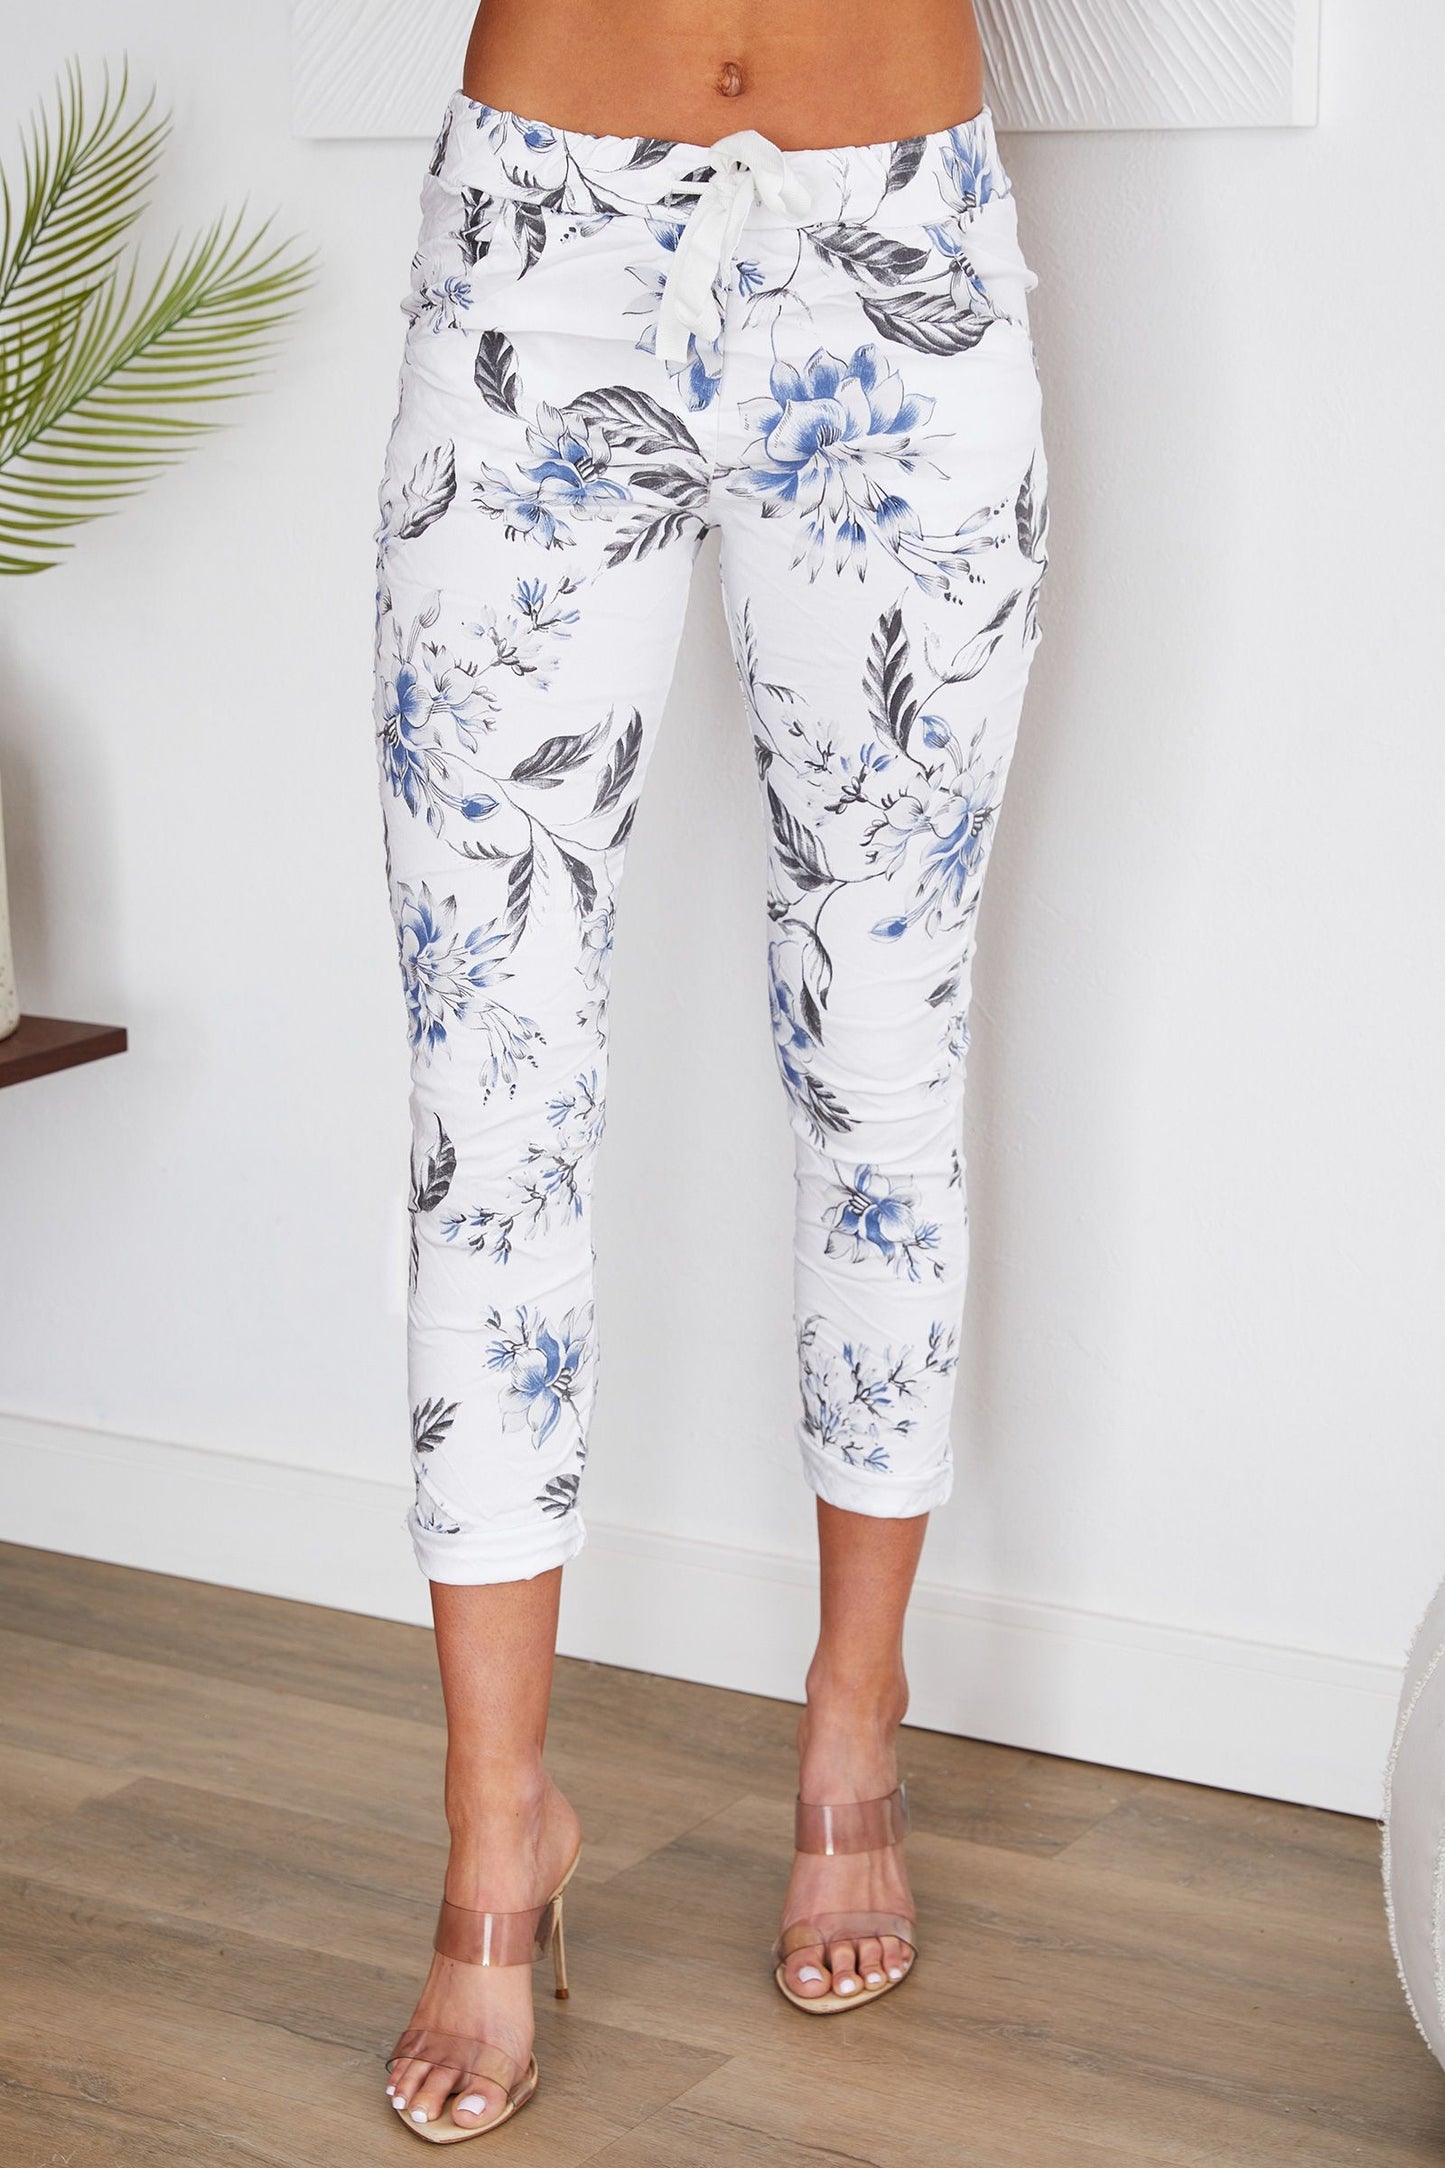 NEW - Venti6 Delicate Blue Flower Print Drawstring Crinkle Joggers with Pockets